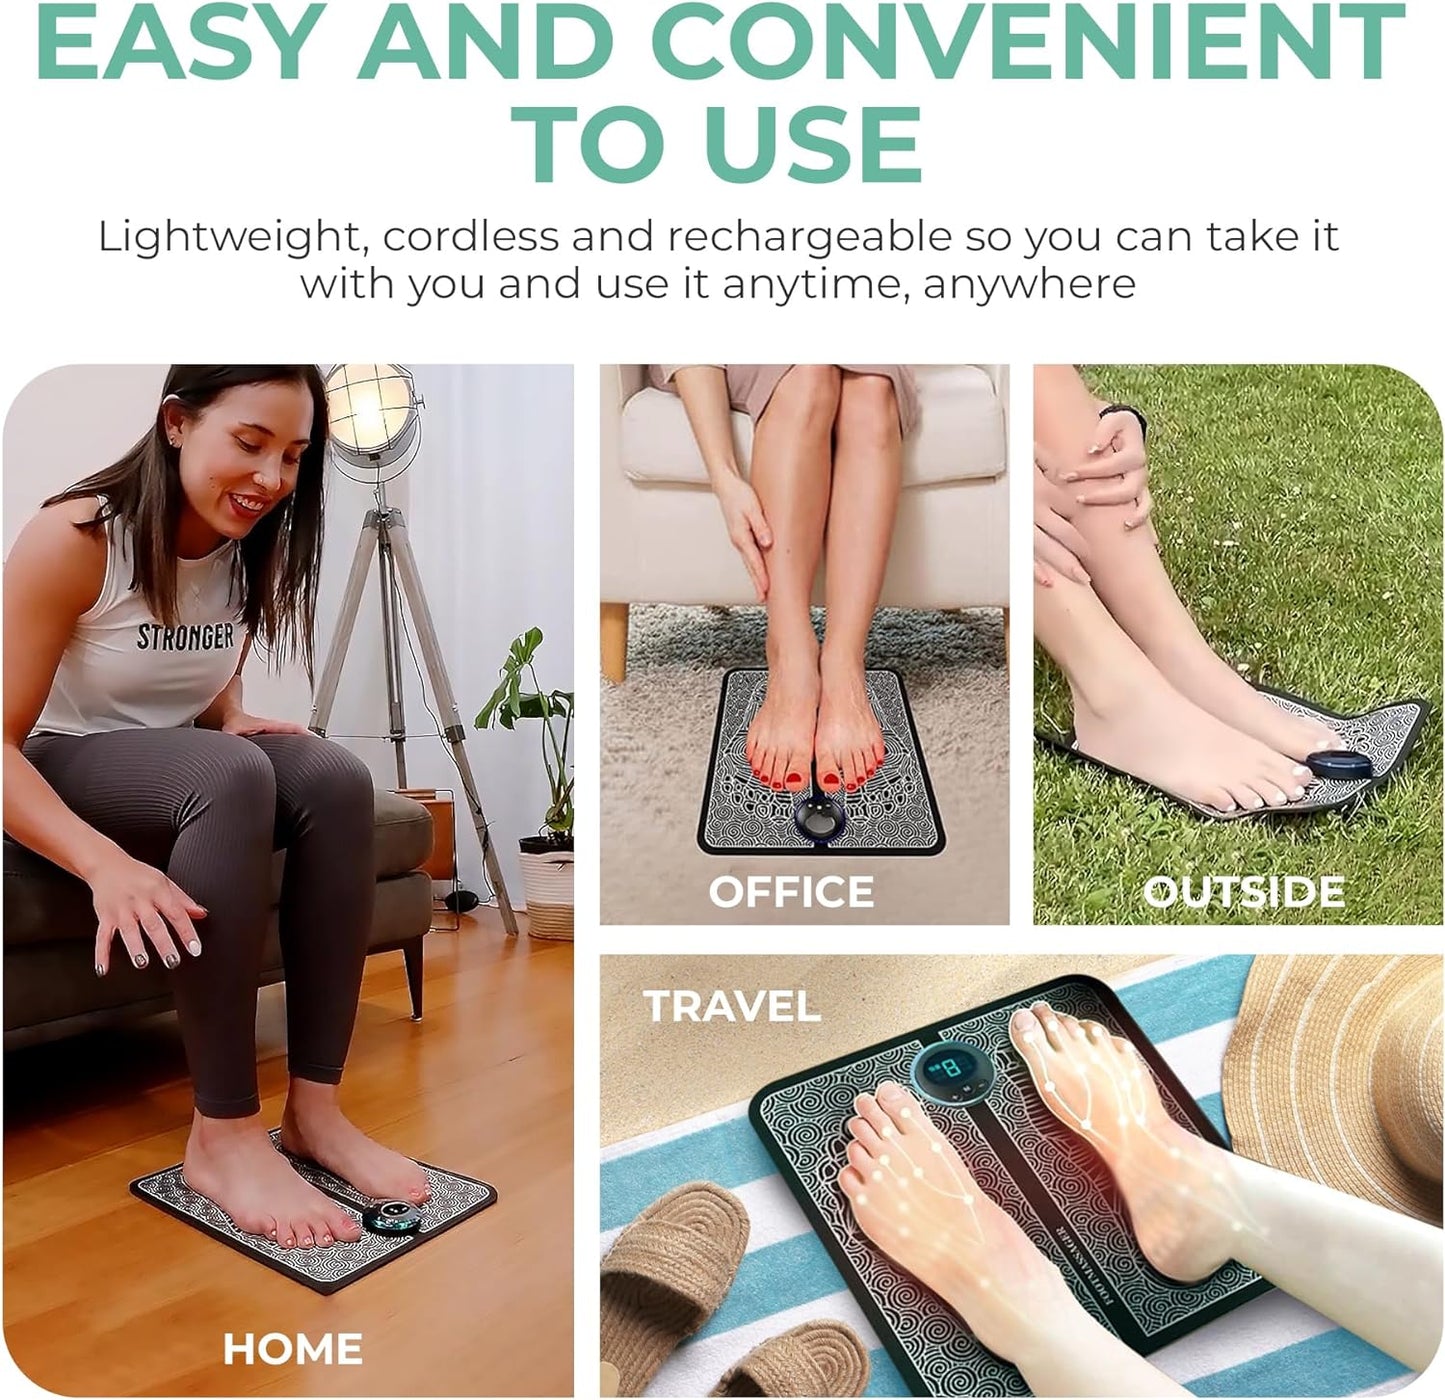 Portable Foot Massager - Soothing Comfort & Revitalization for Tired Feet